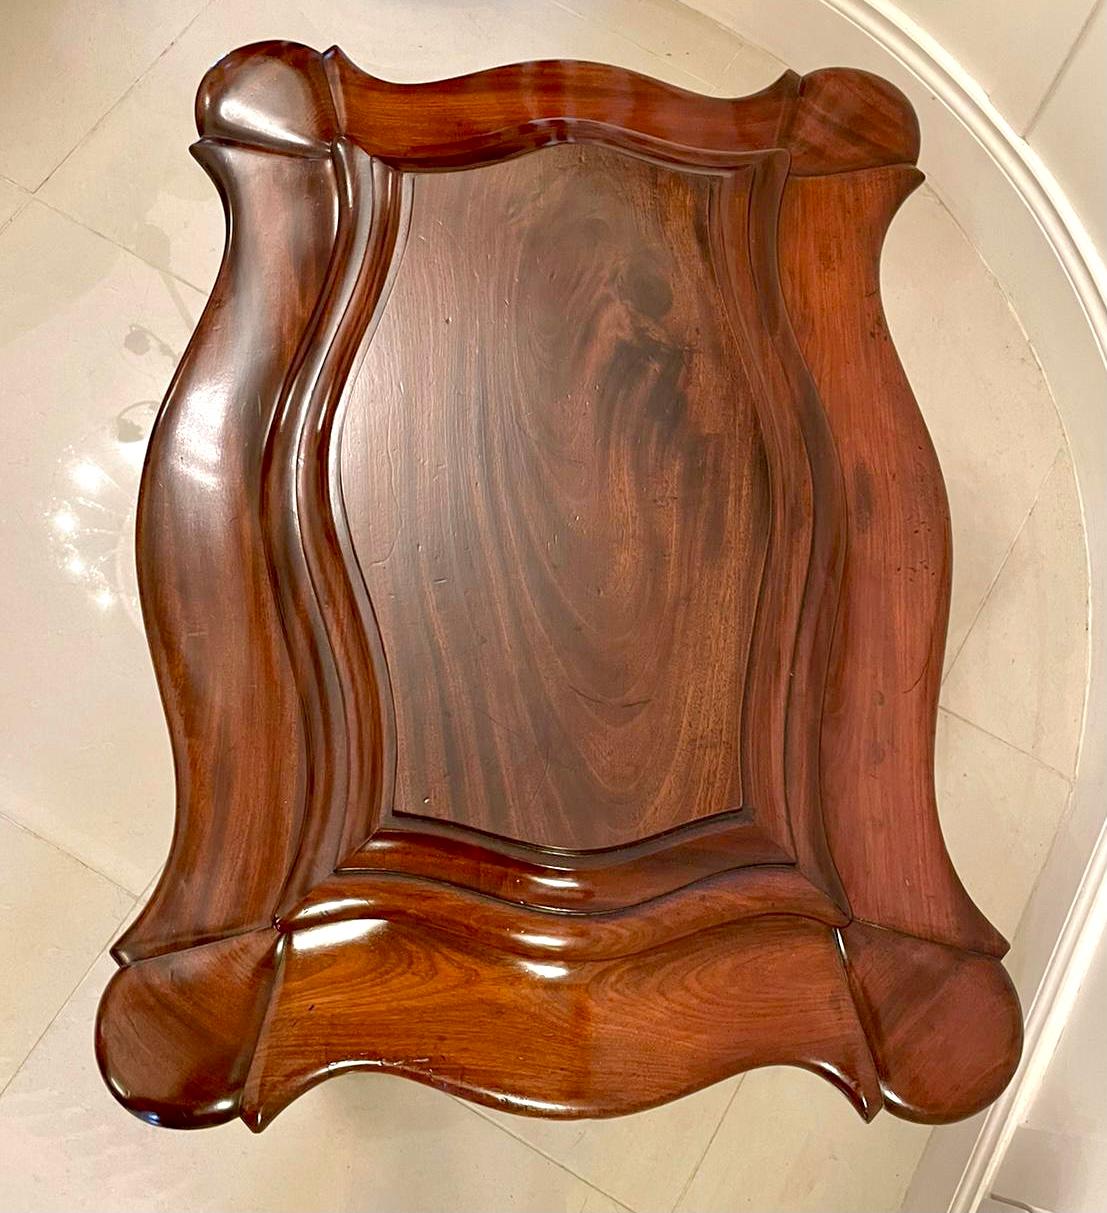 Outstanding Quality Antique William IV Mahogany Serpentine Shaped Wine Cooler For Sale 4